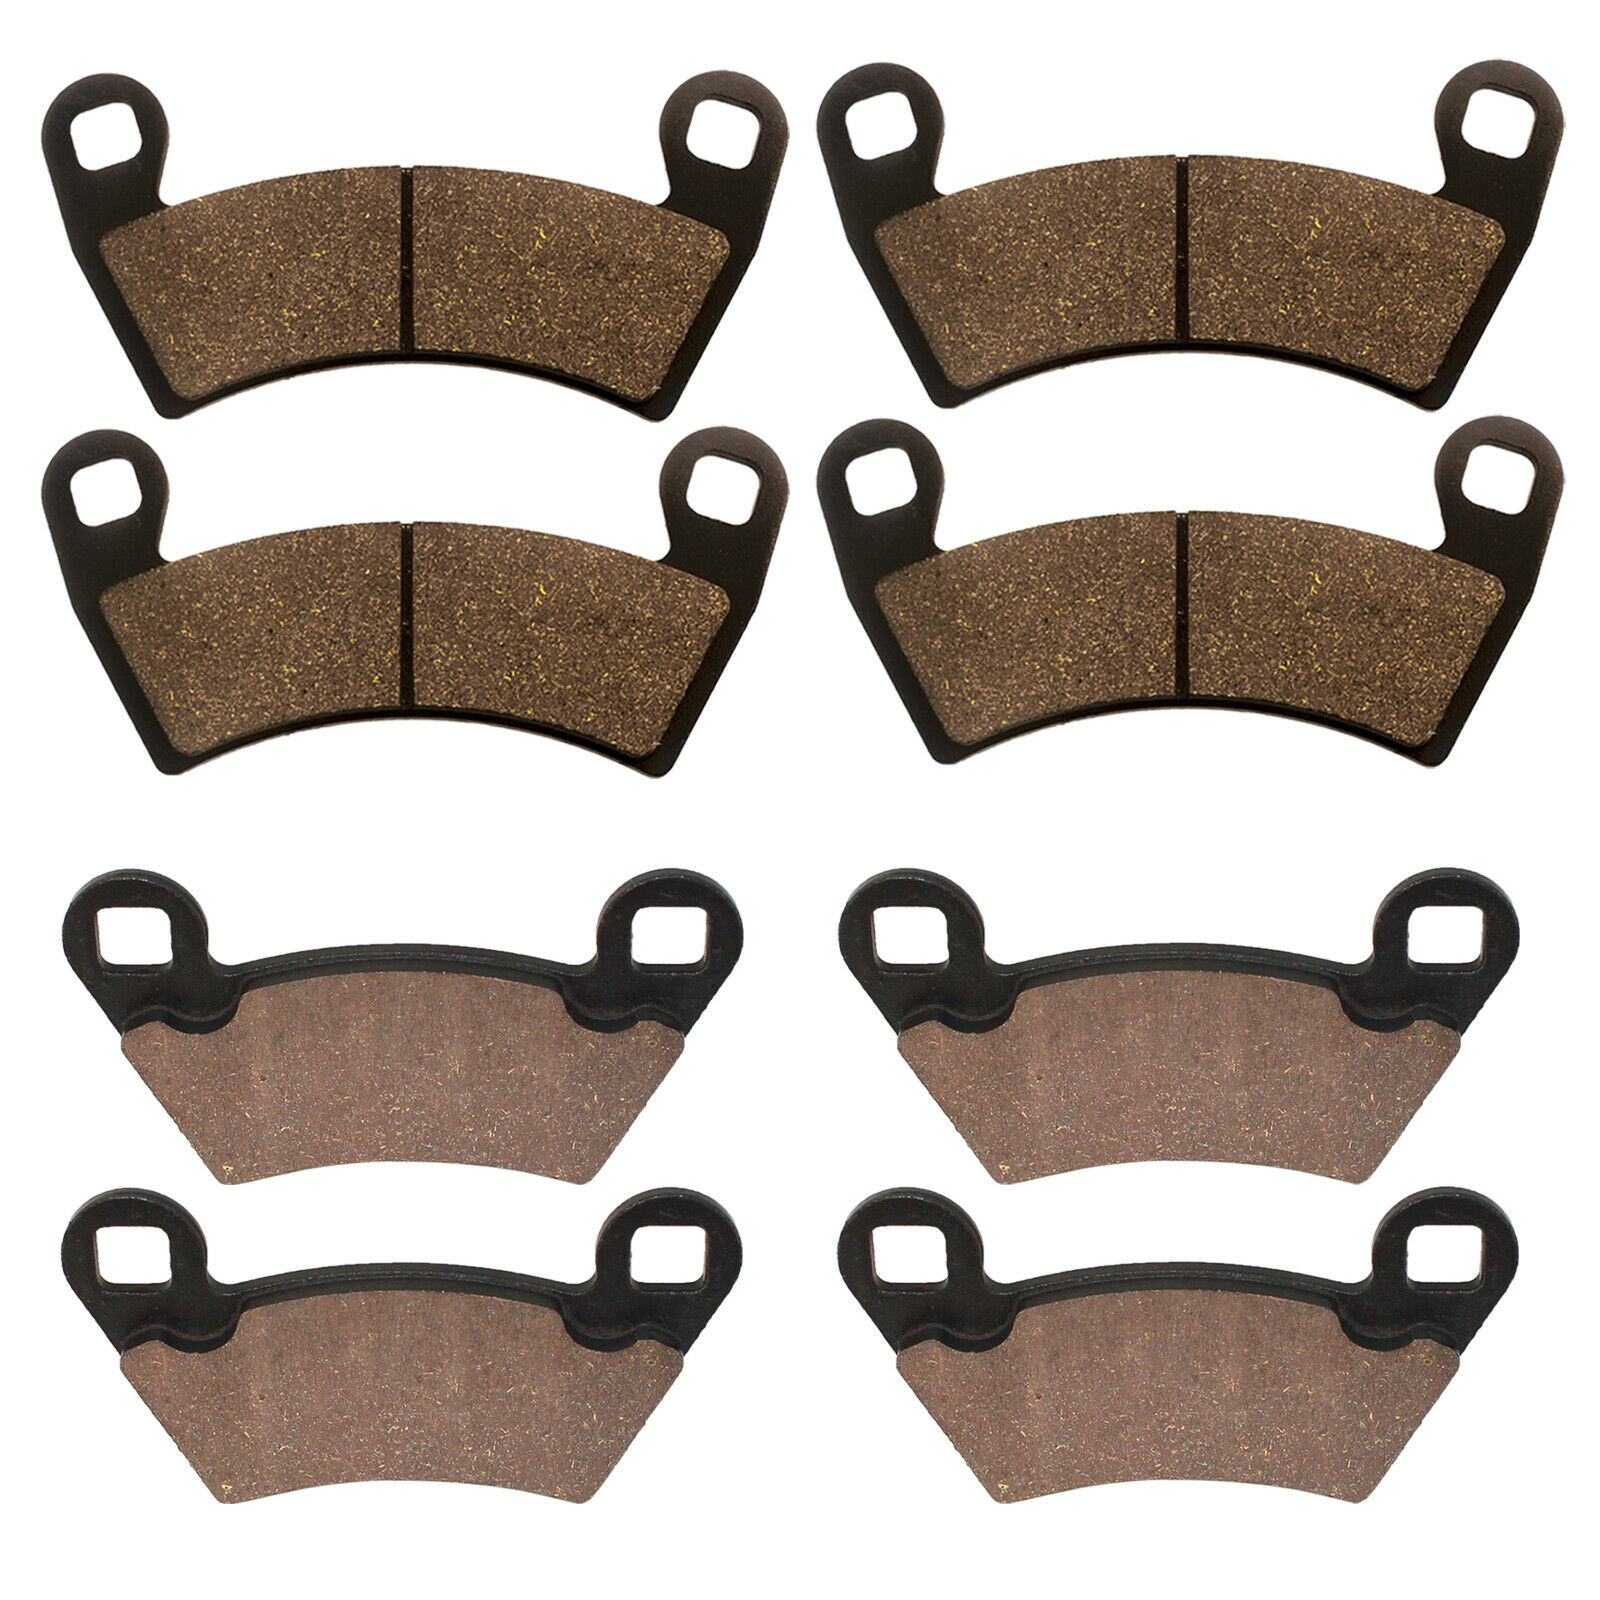 Caltric Front and Rear Brake Pads for Polaris Ranger 800 4X4 EFI 2010-2014